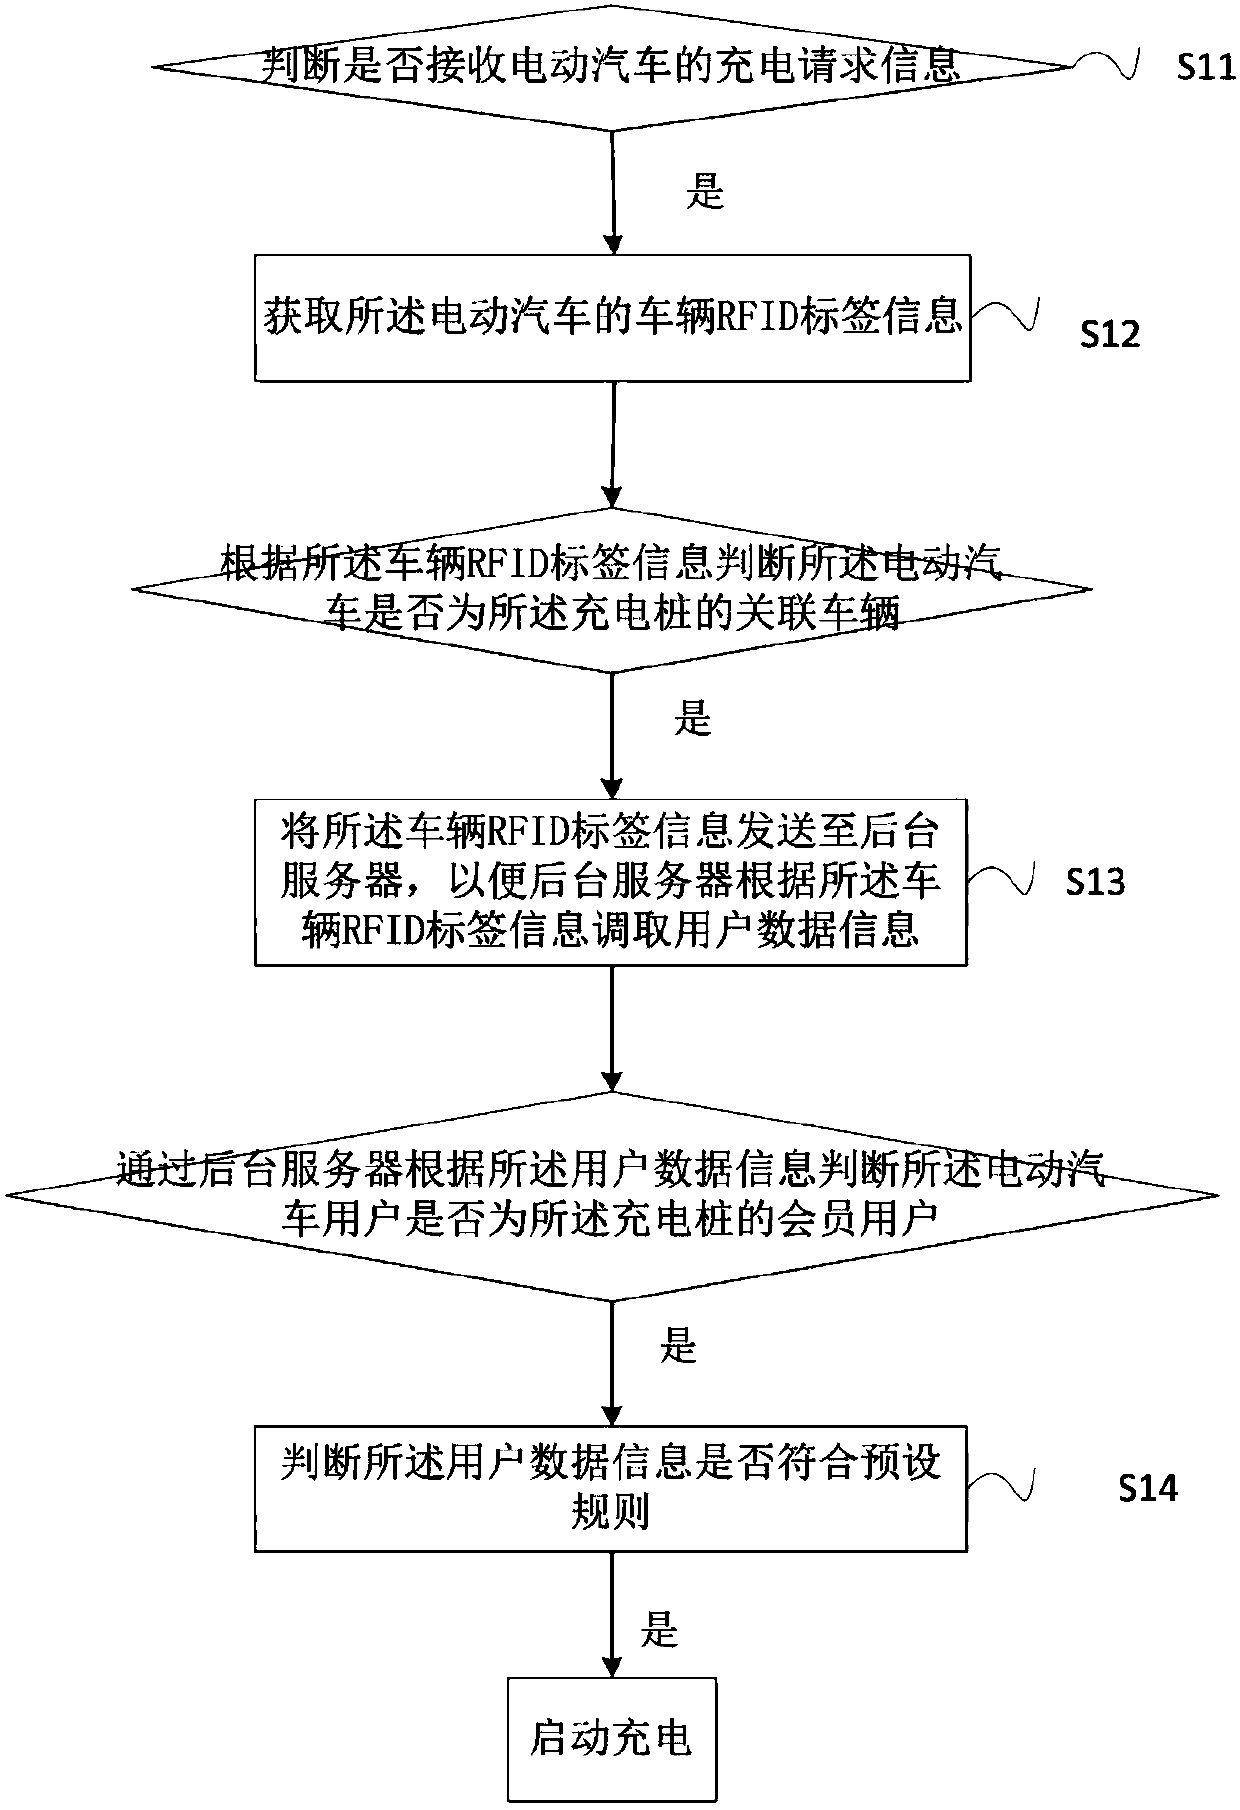 Electric vehicle charging recognition method and system